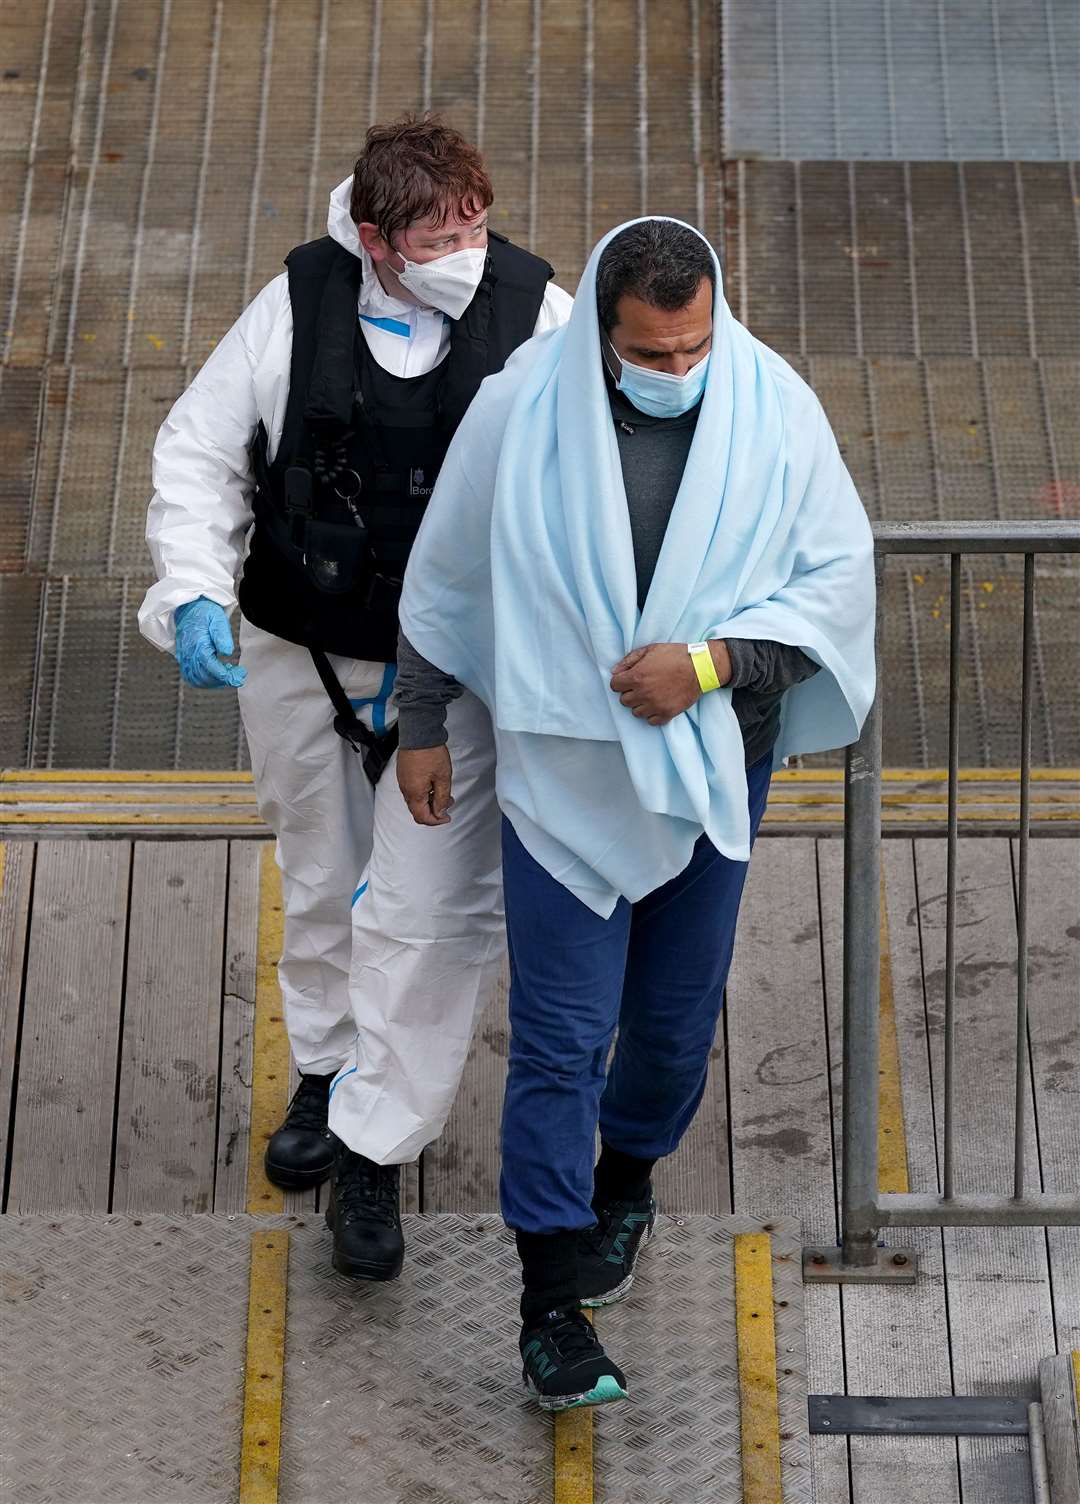 A man is seen exiting the jetty covered in a blanket after being removed from one of the boats (Gareth Fuller/PA)